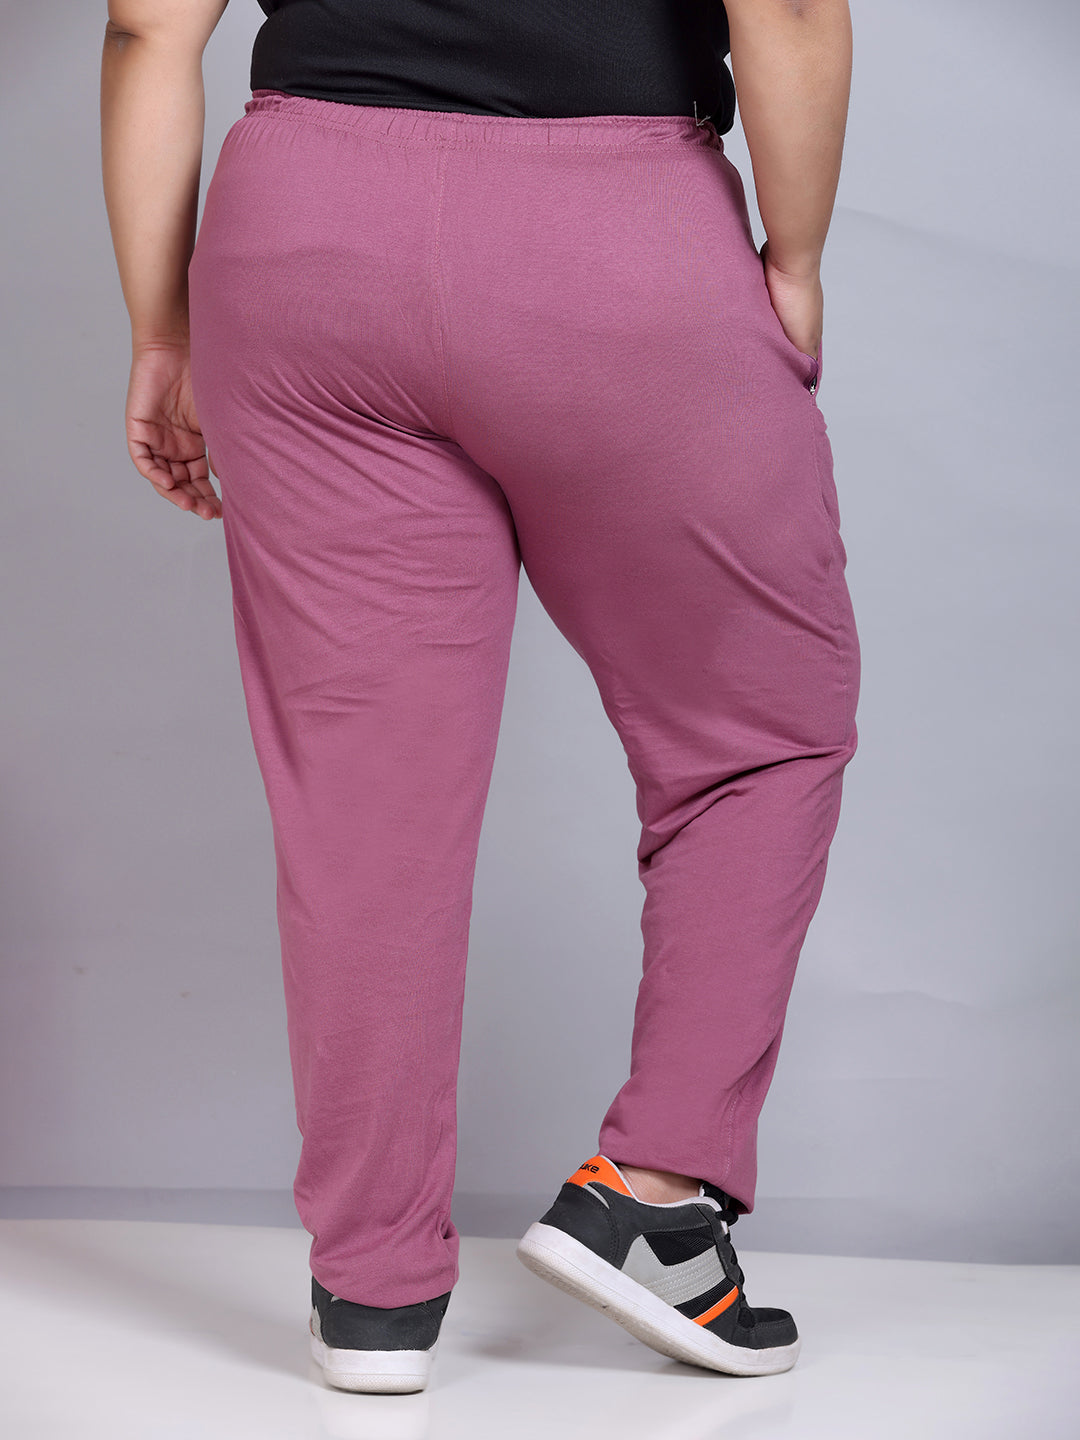 Comfy Mauve Cotton Track Pants For Women At Best Prices